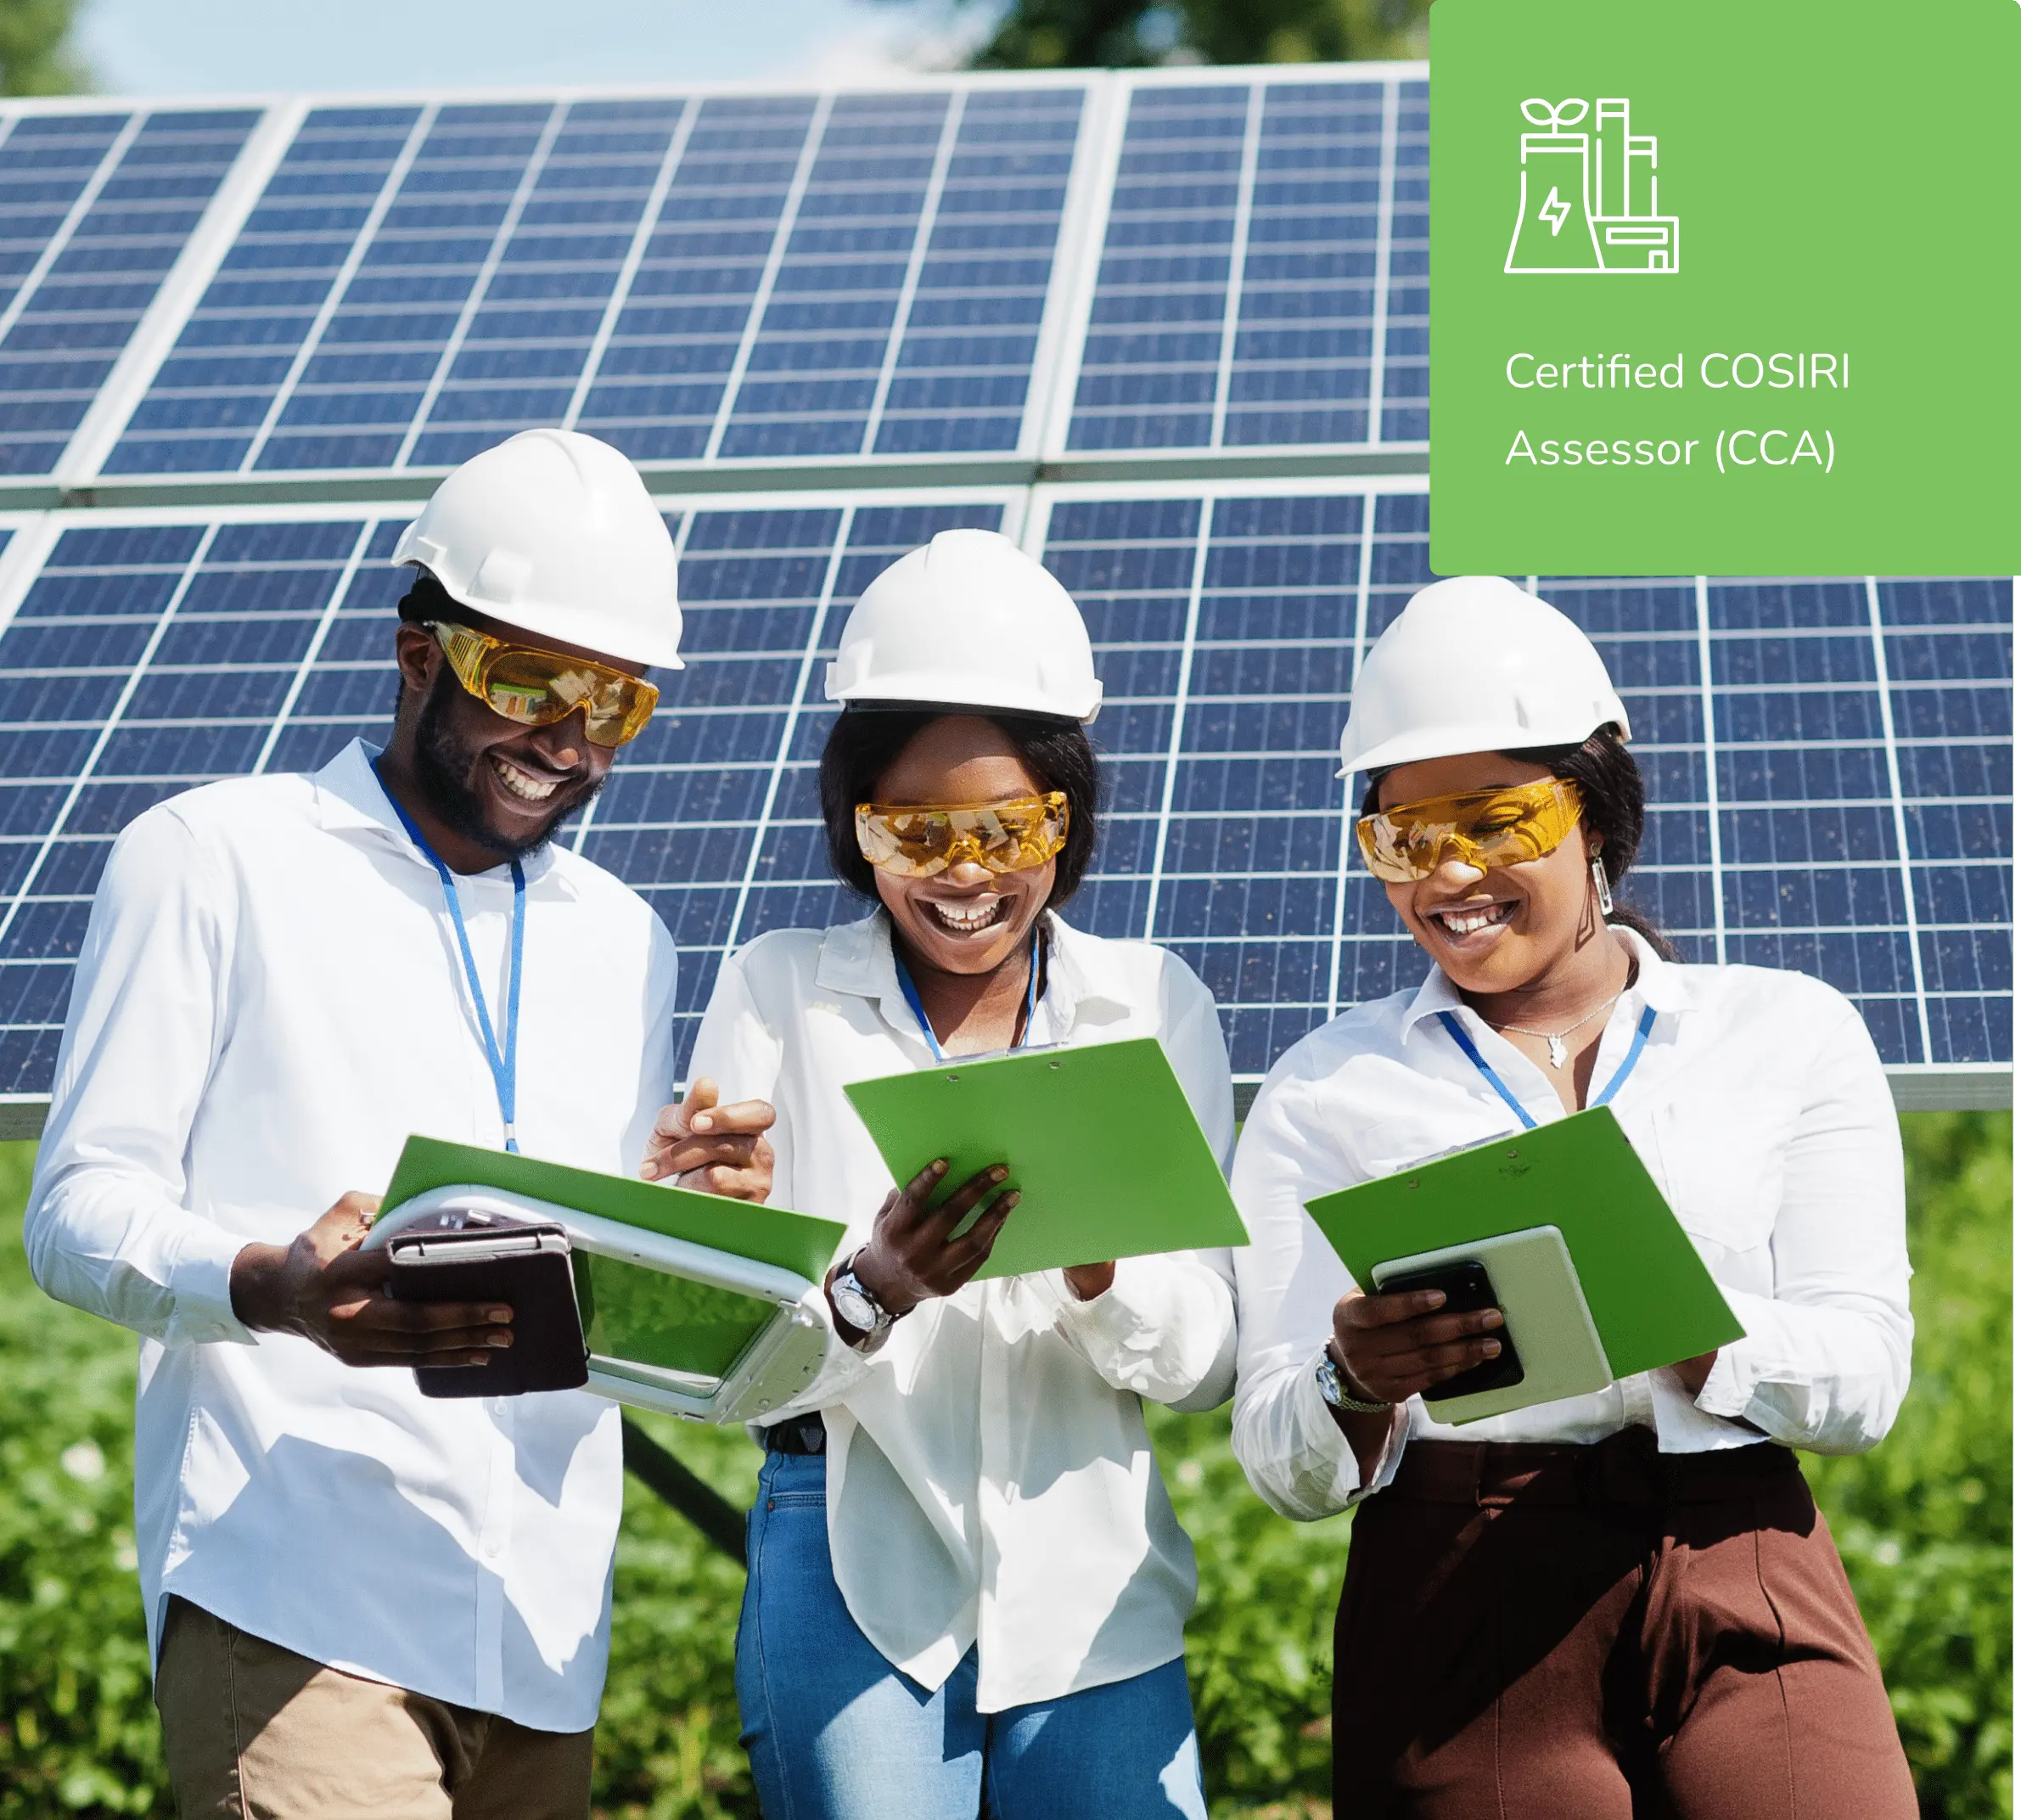 Three people in hard hats standing in front of solar panels, representing industry readiness in the consumer sustainability space.